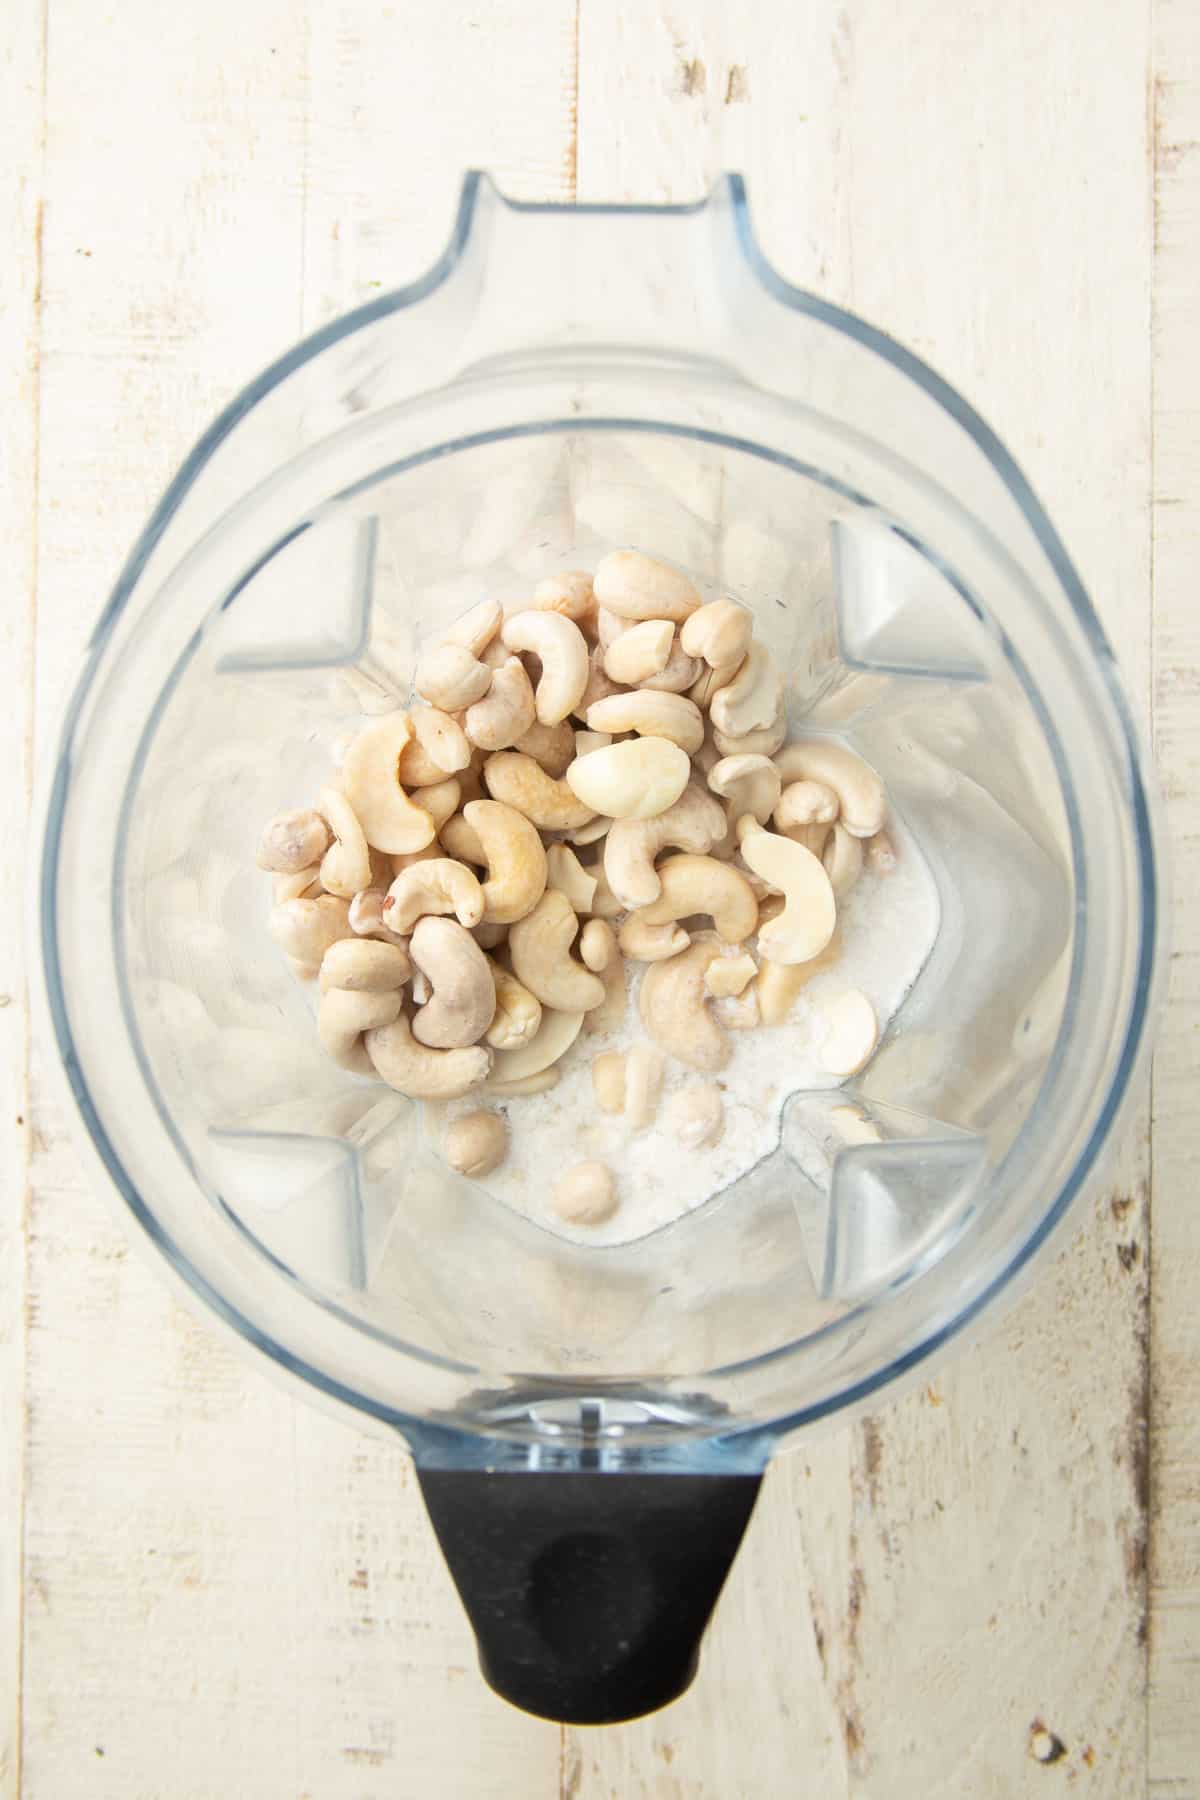 Ingredients for cashew cheese in a blender.